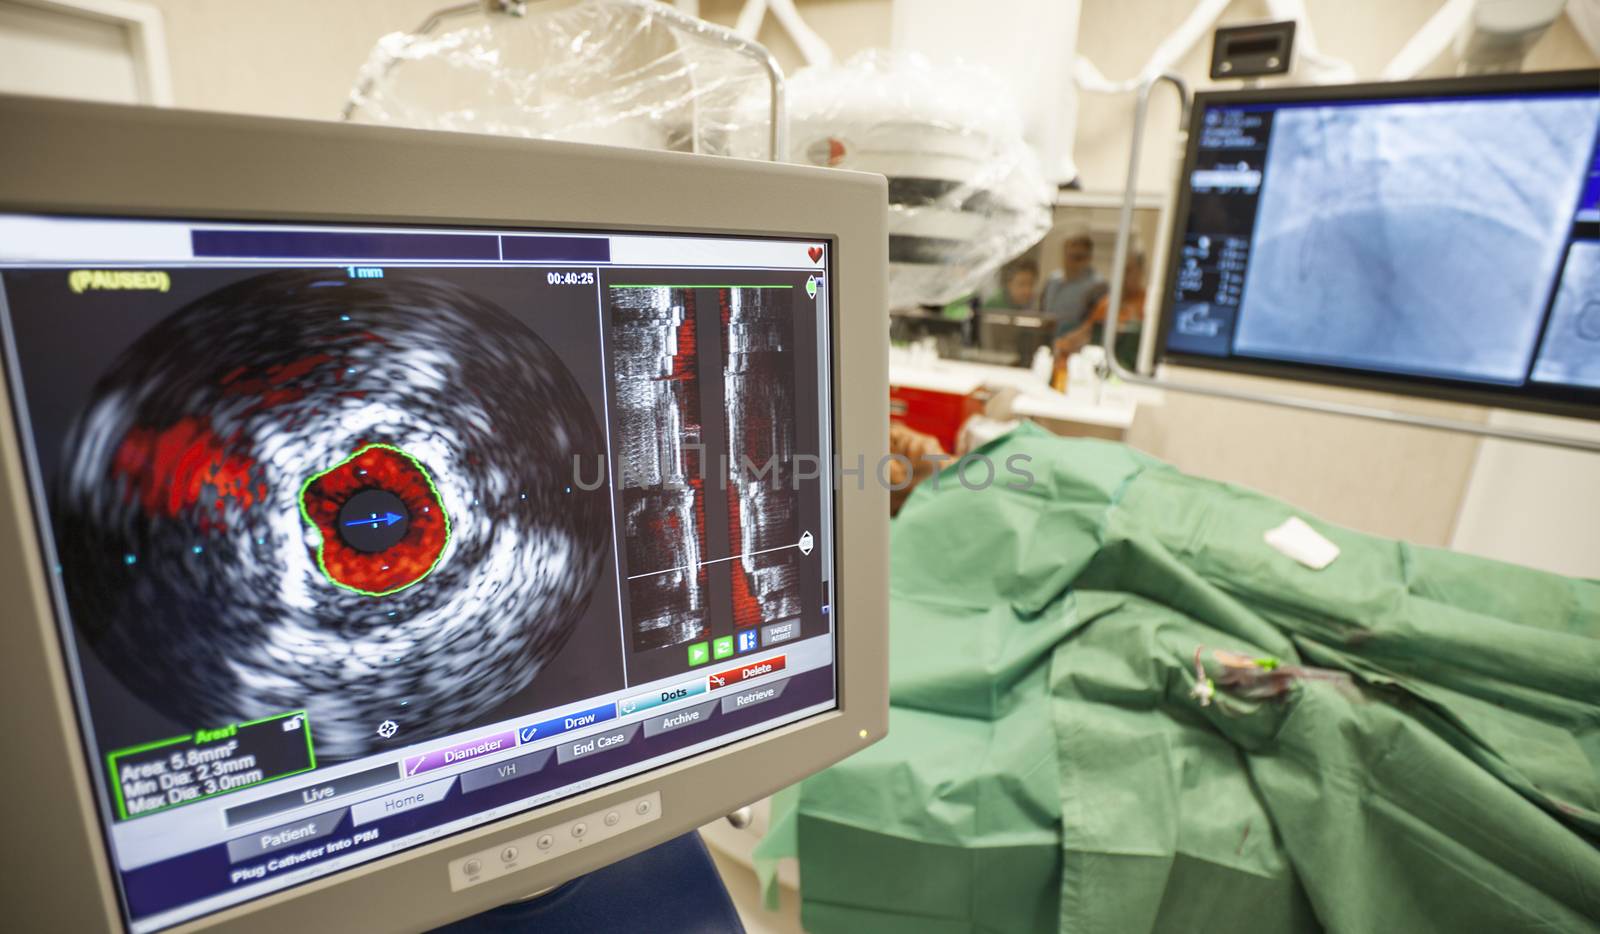 A monitor with an image of a blood vessel during laparoscopic surgery in modern hospital.